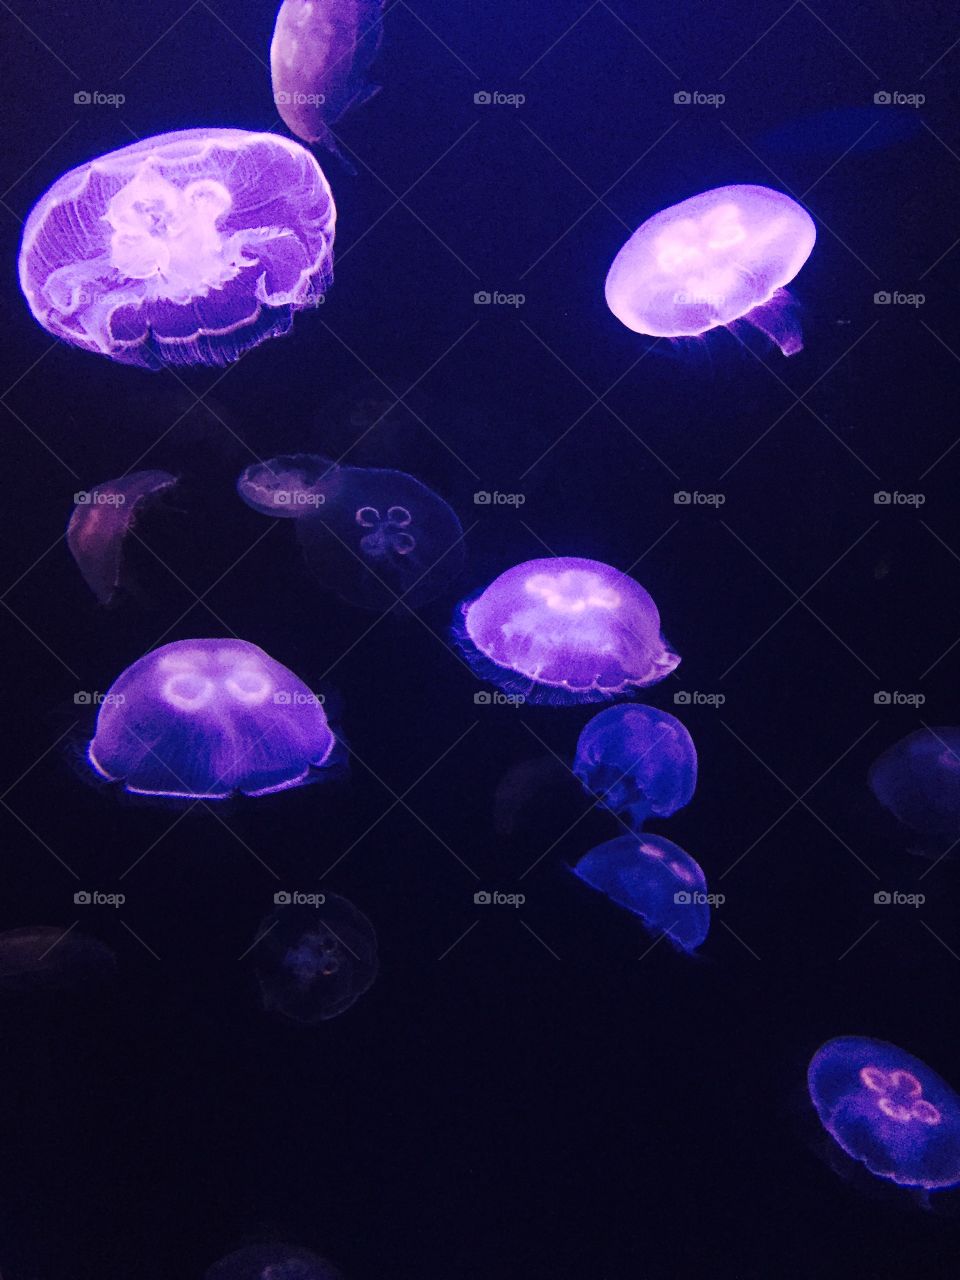 Some jelly fish. 